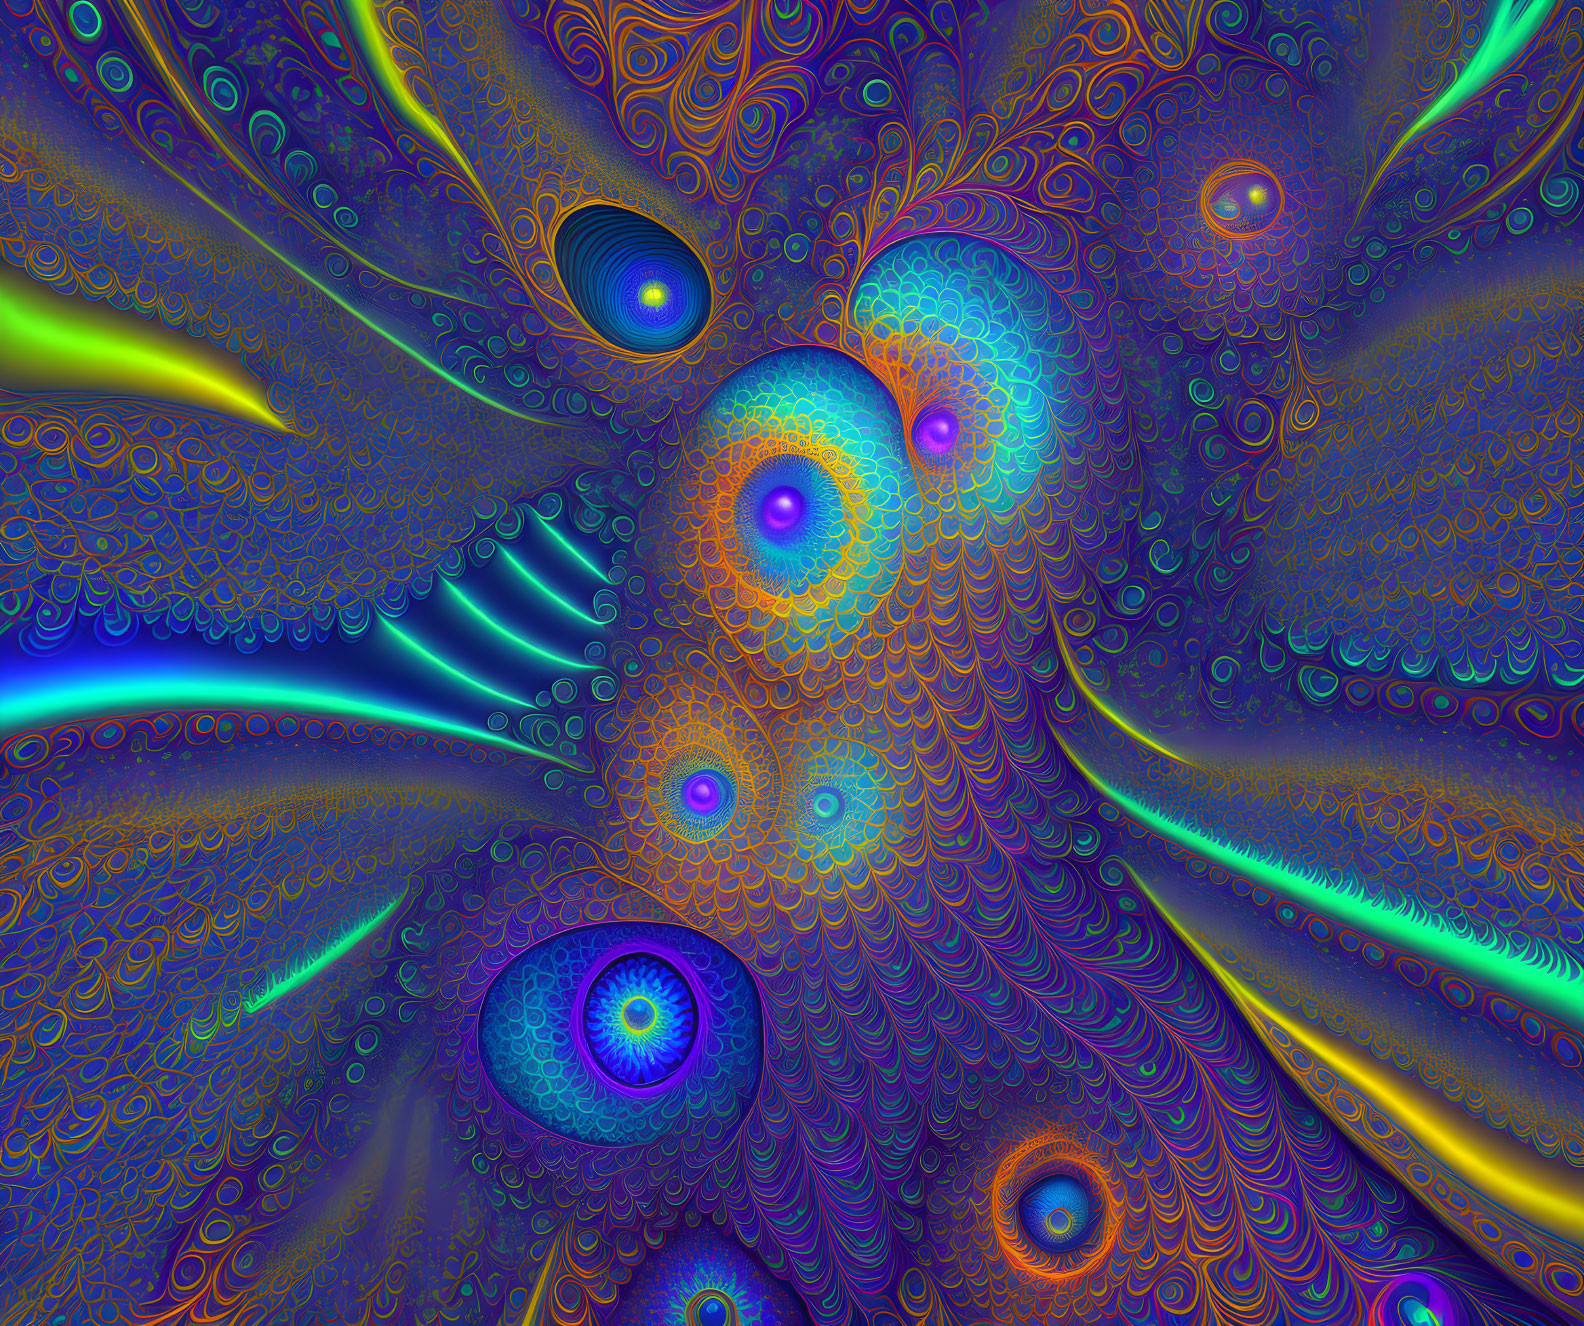 Colorful High-Resolution Fractal Image of Swirling Feather-Like Patterns